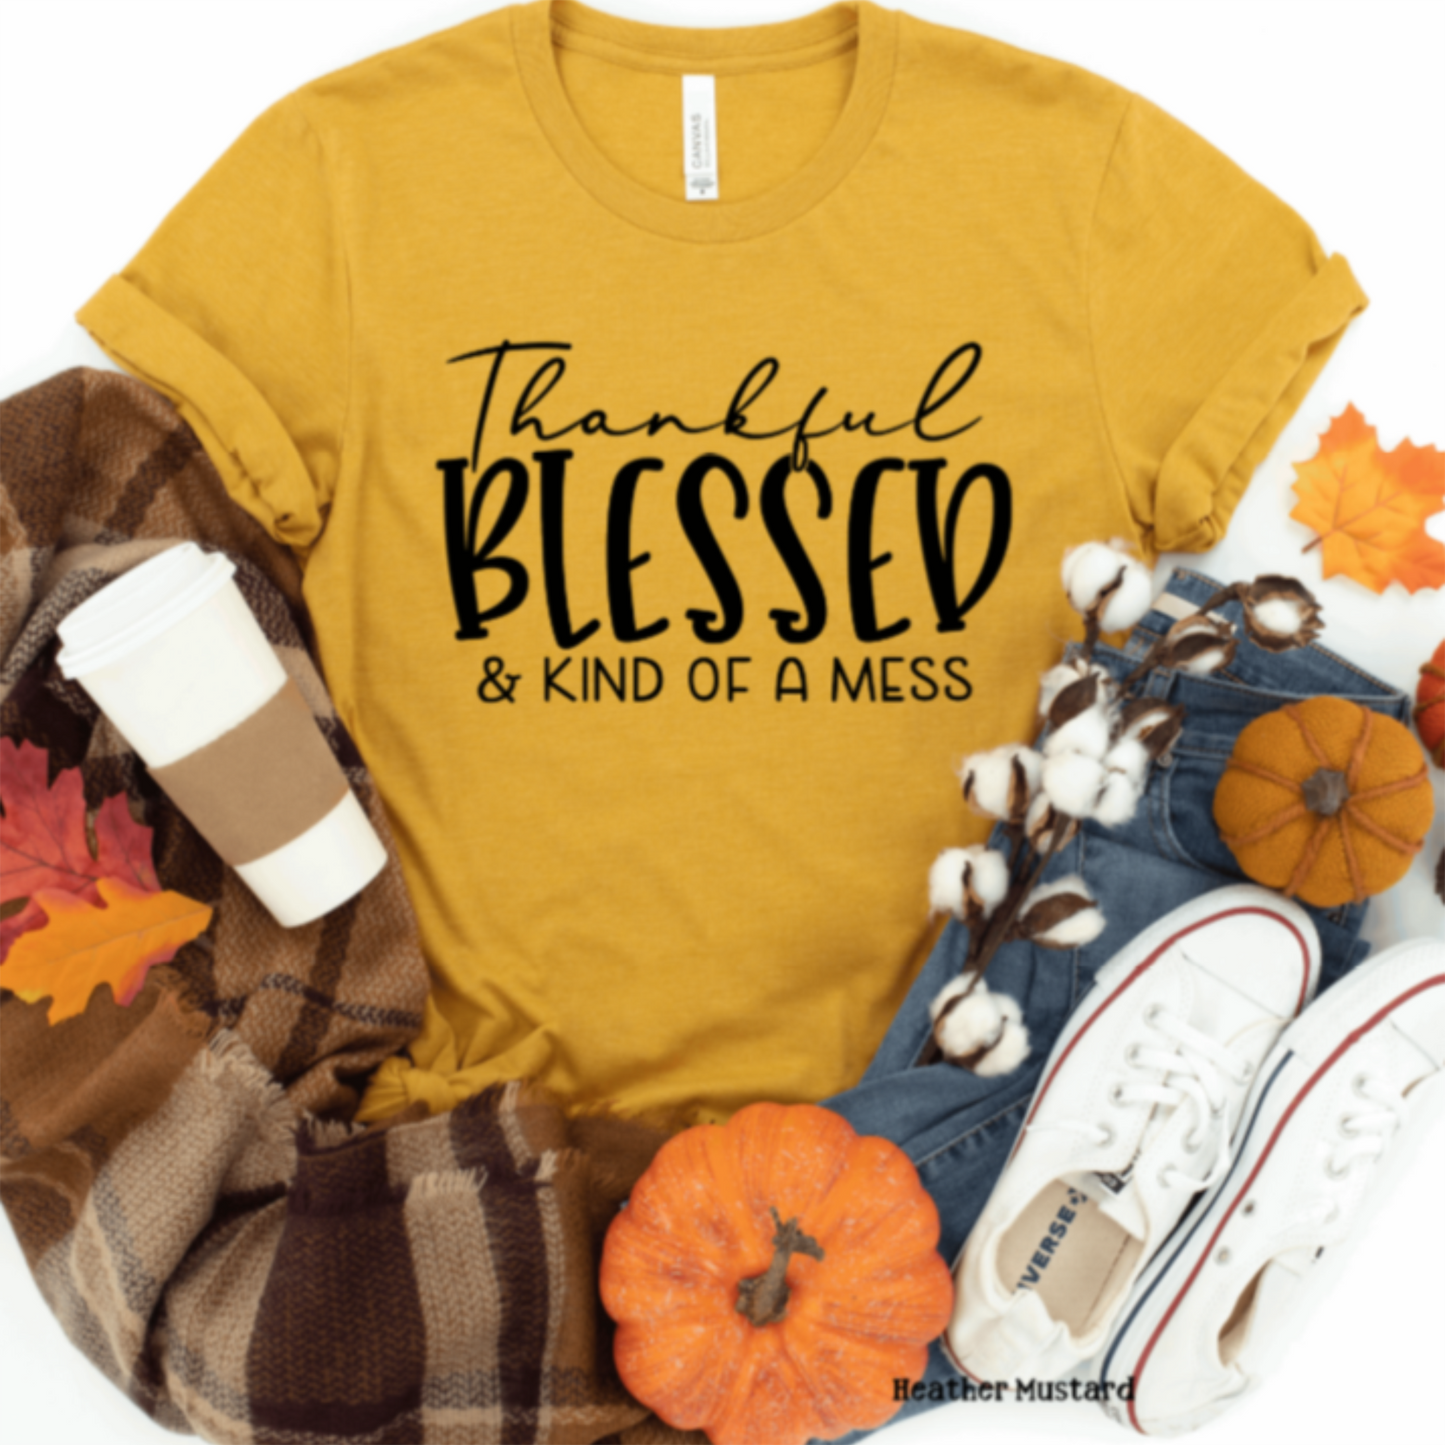 Thankful Blessed & Kind of a Mess - Black (325°)